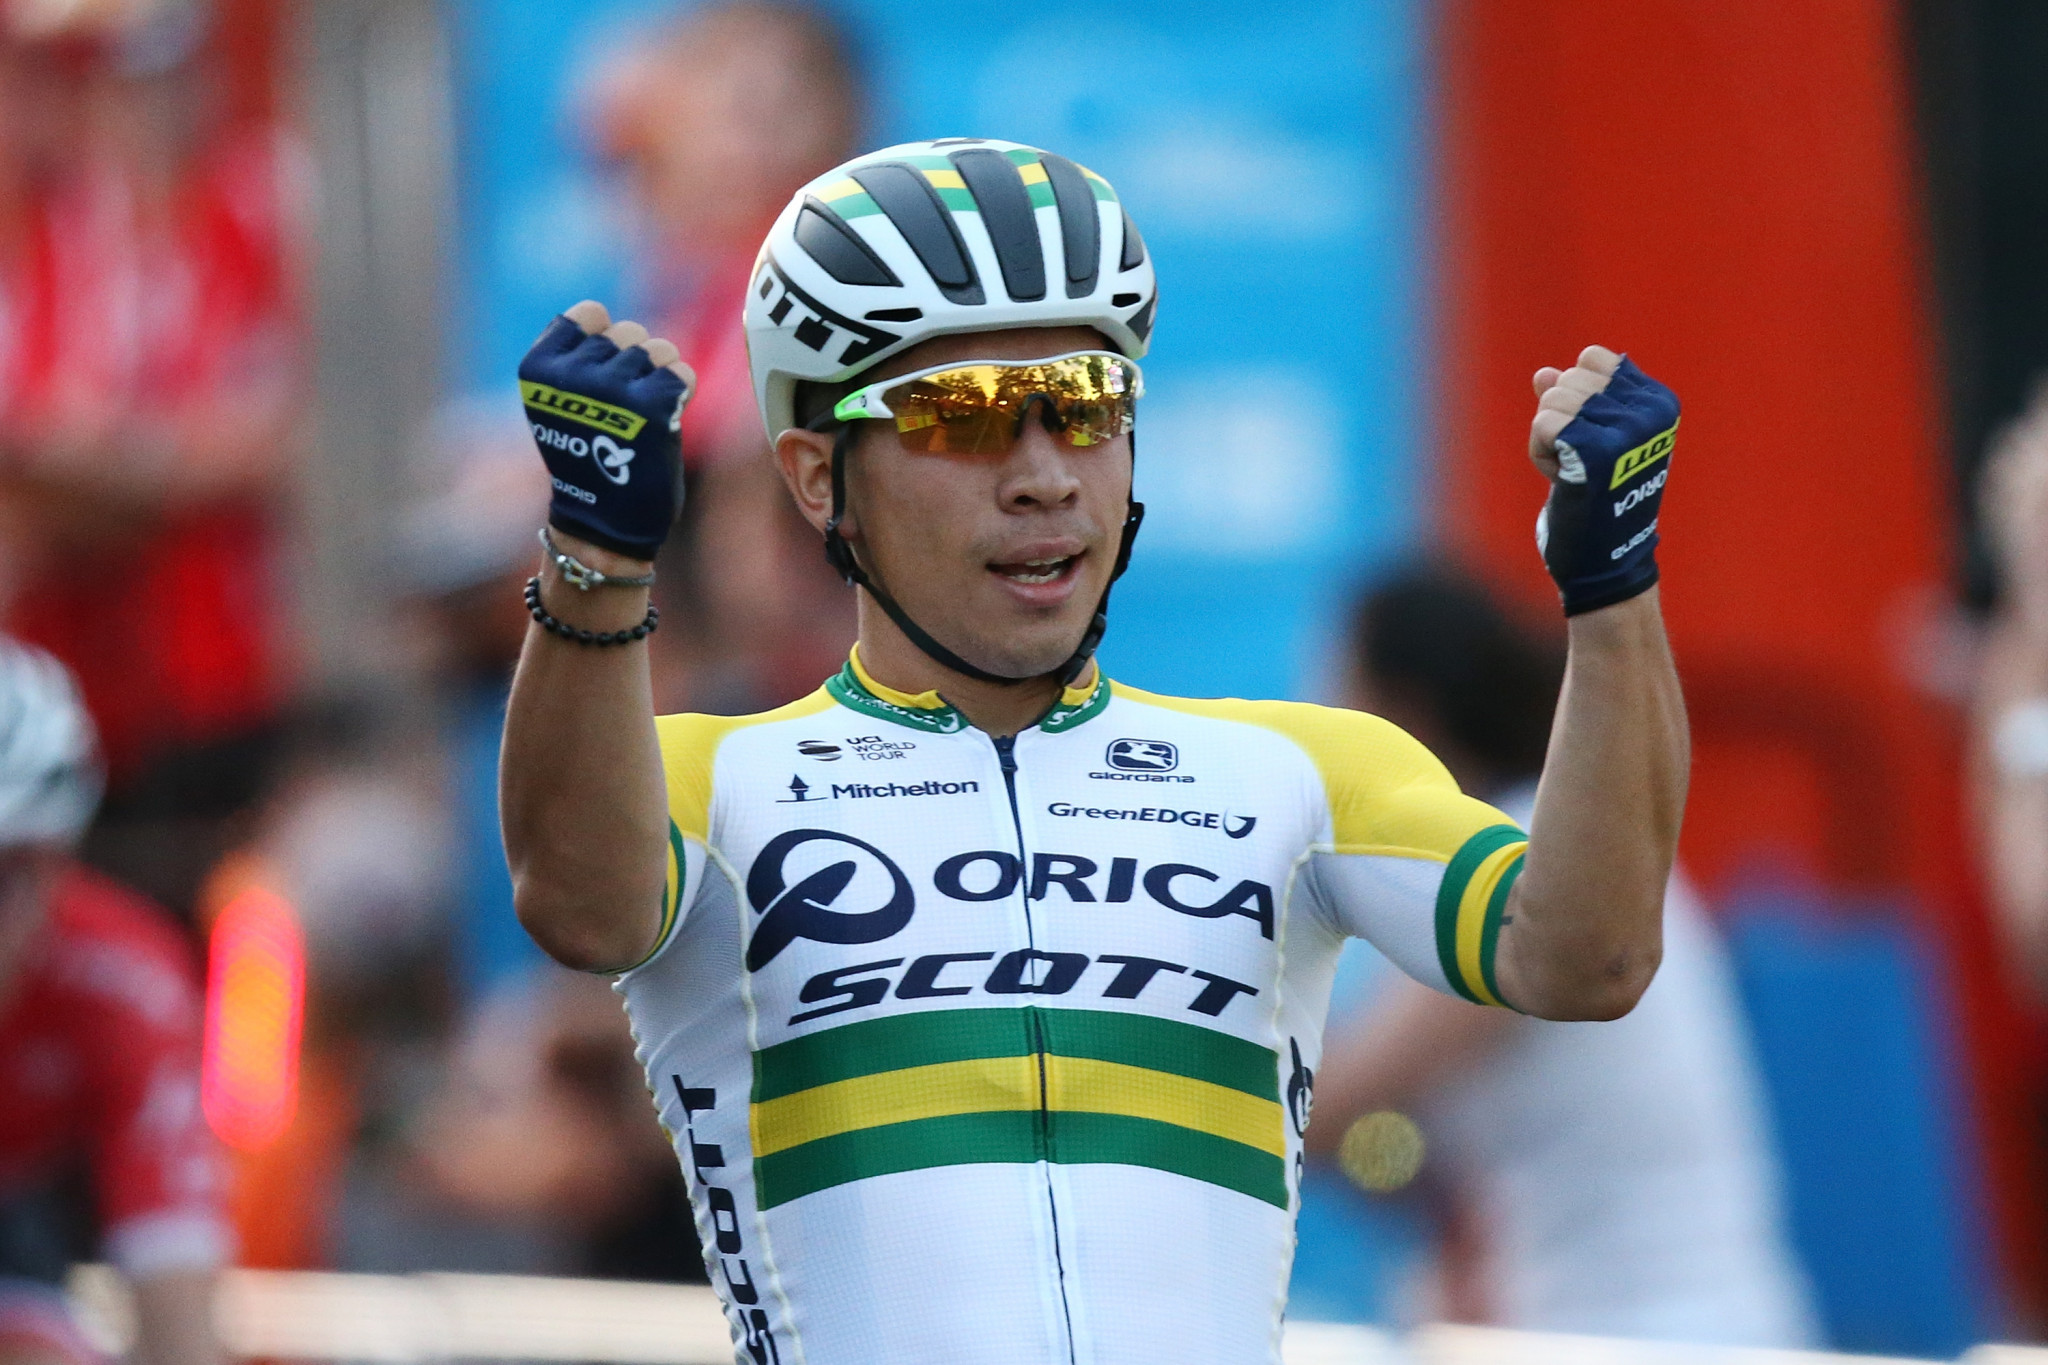 Australia's Caleb Ewan was leading up until the final seconds of the race ©Getty Images